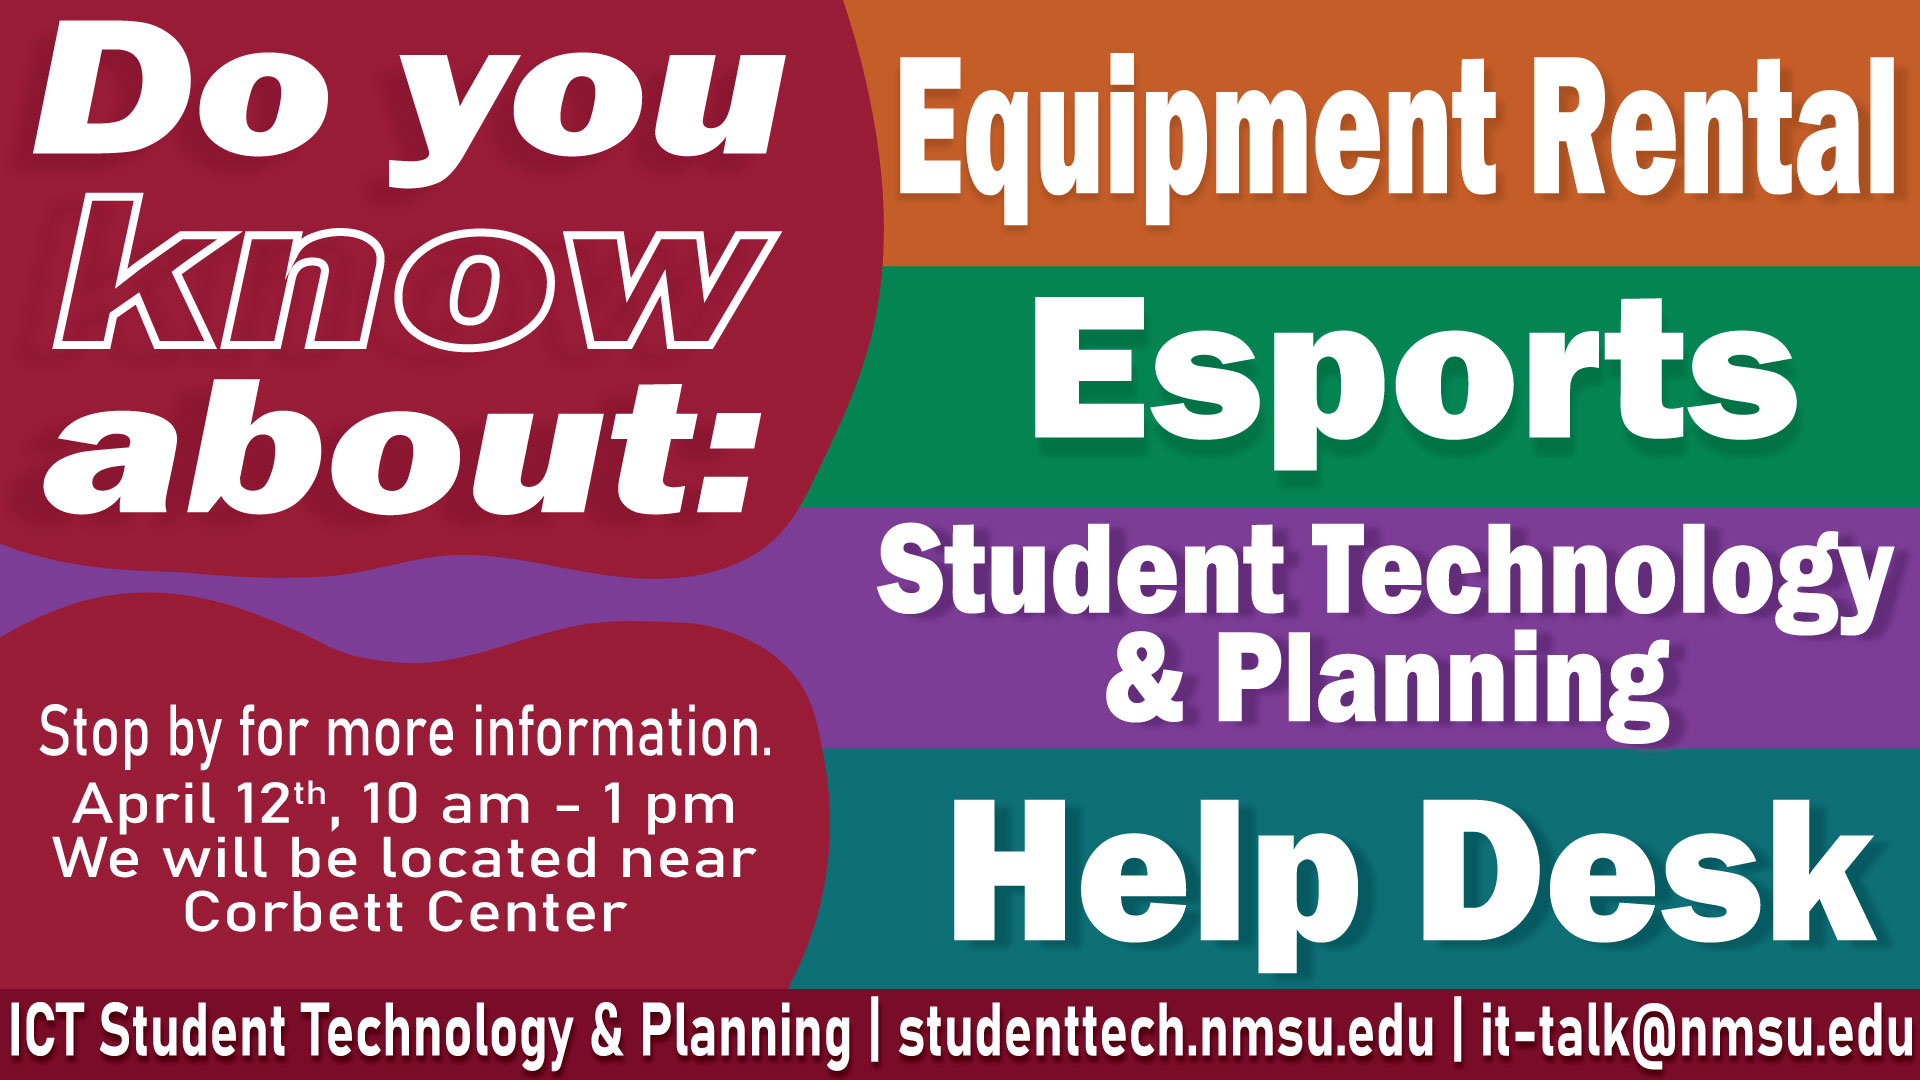 Do you know about: Equipment Rental, Esports, Student Technology and Planning, or the ICT Help Desk? Stop by for more information. April 12th, 10 am - 1 pm. We will be located near Corbett Center.